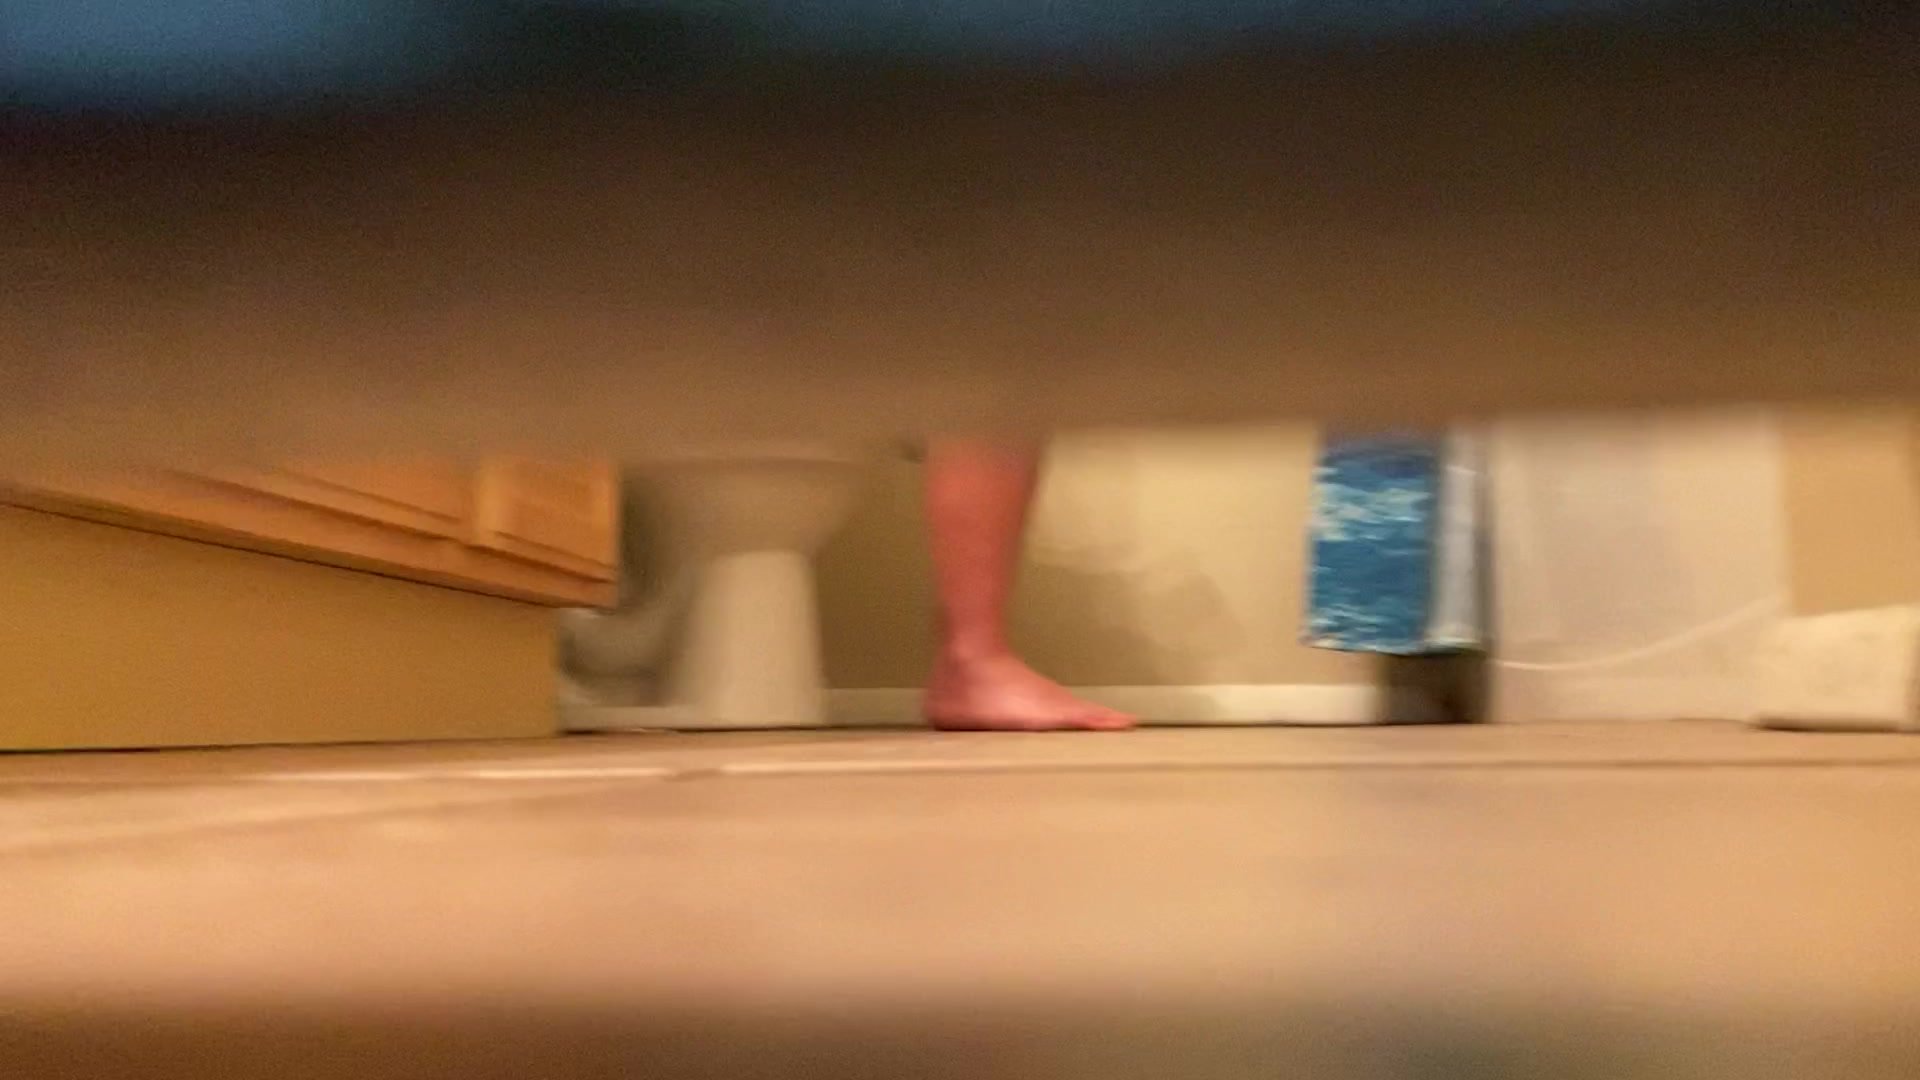 Spying on friend having a tinkle in the potty bathroom